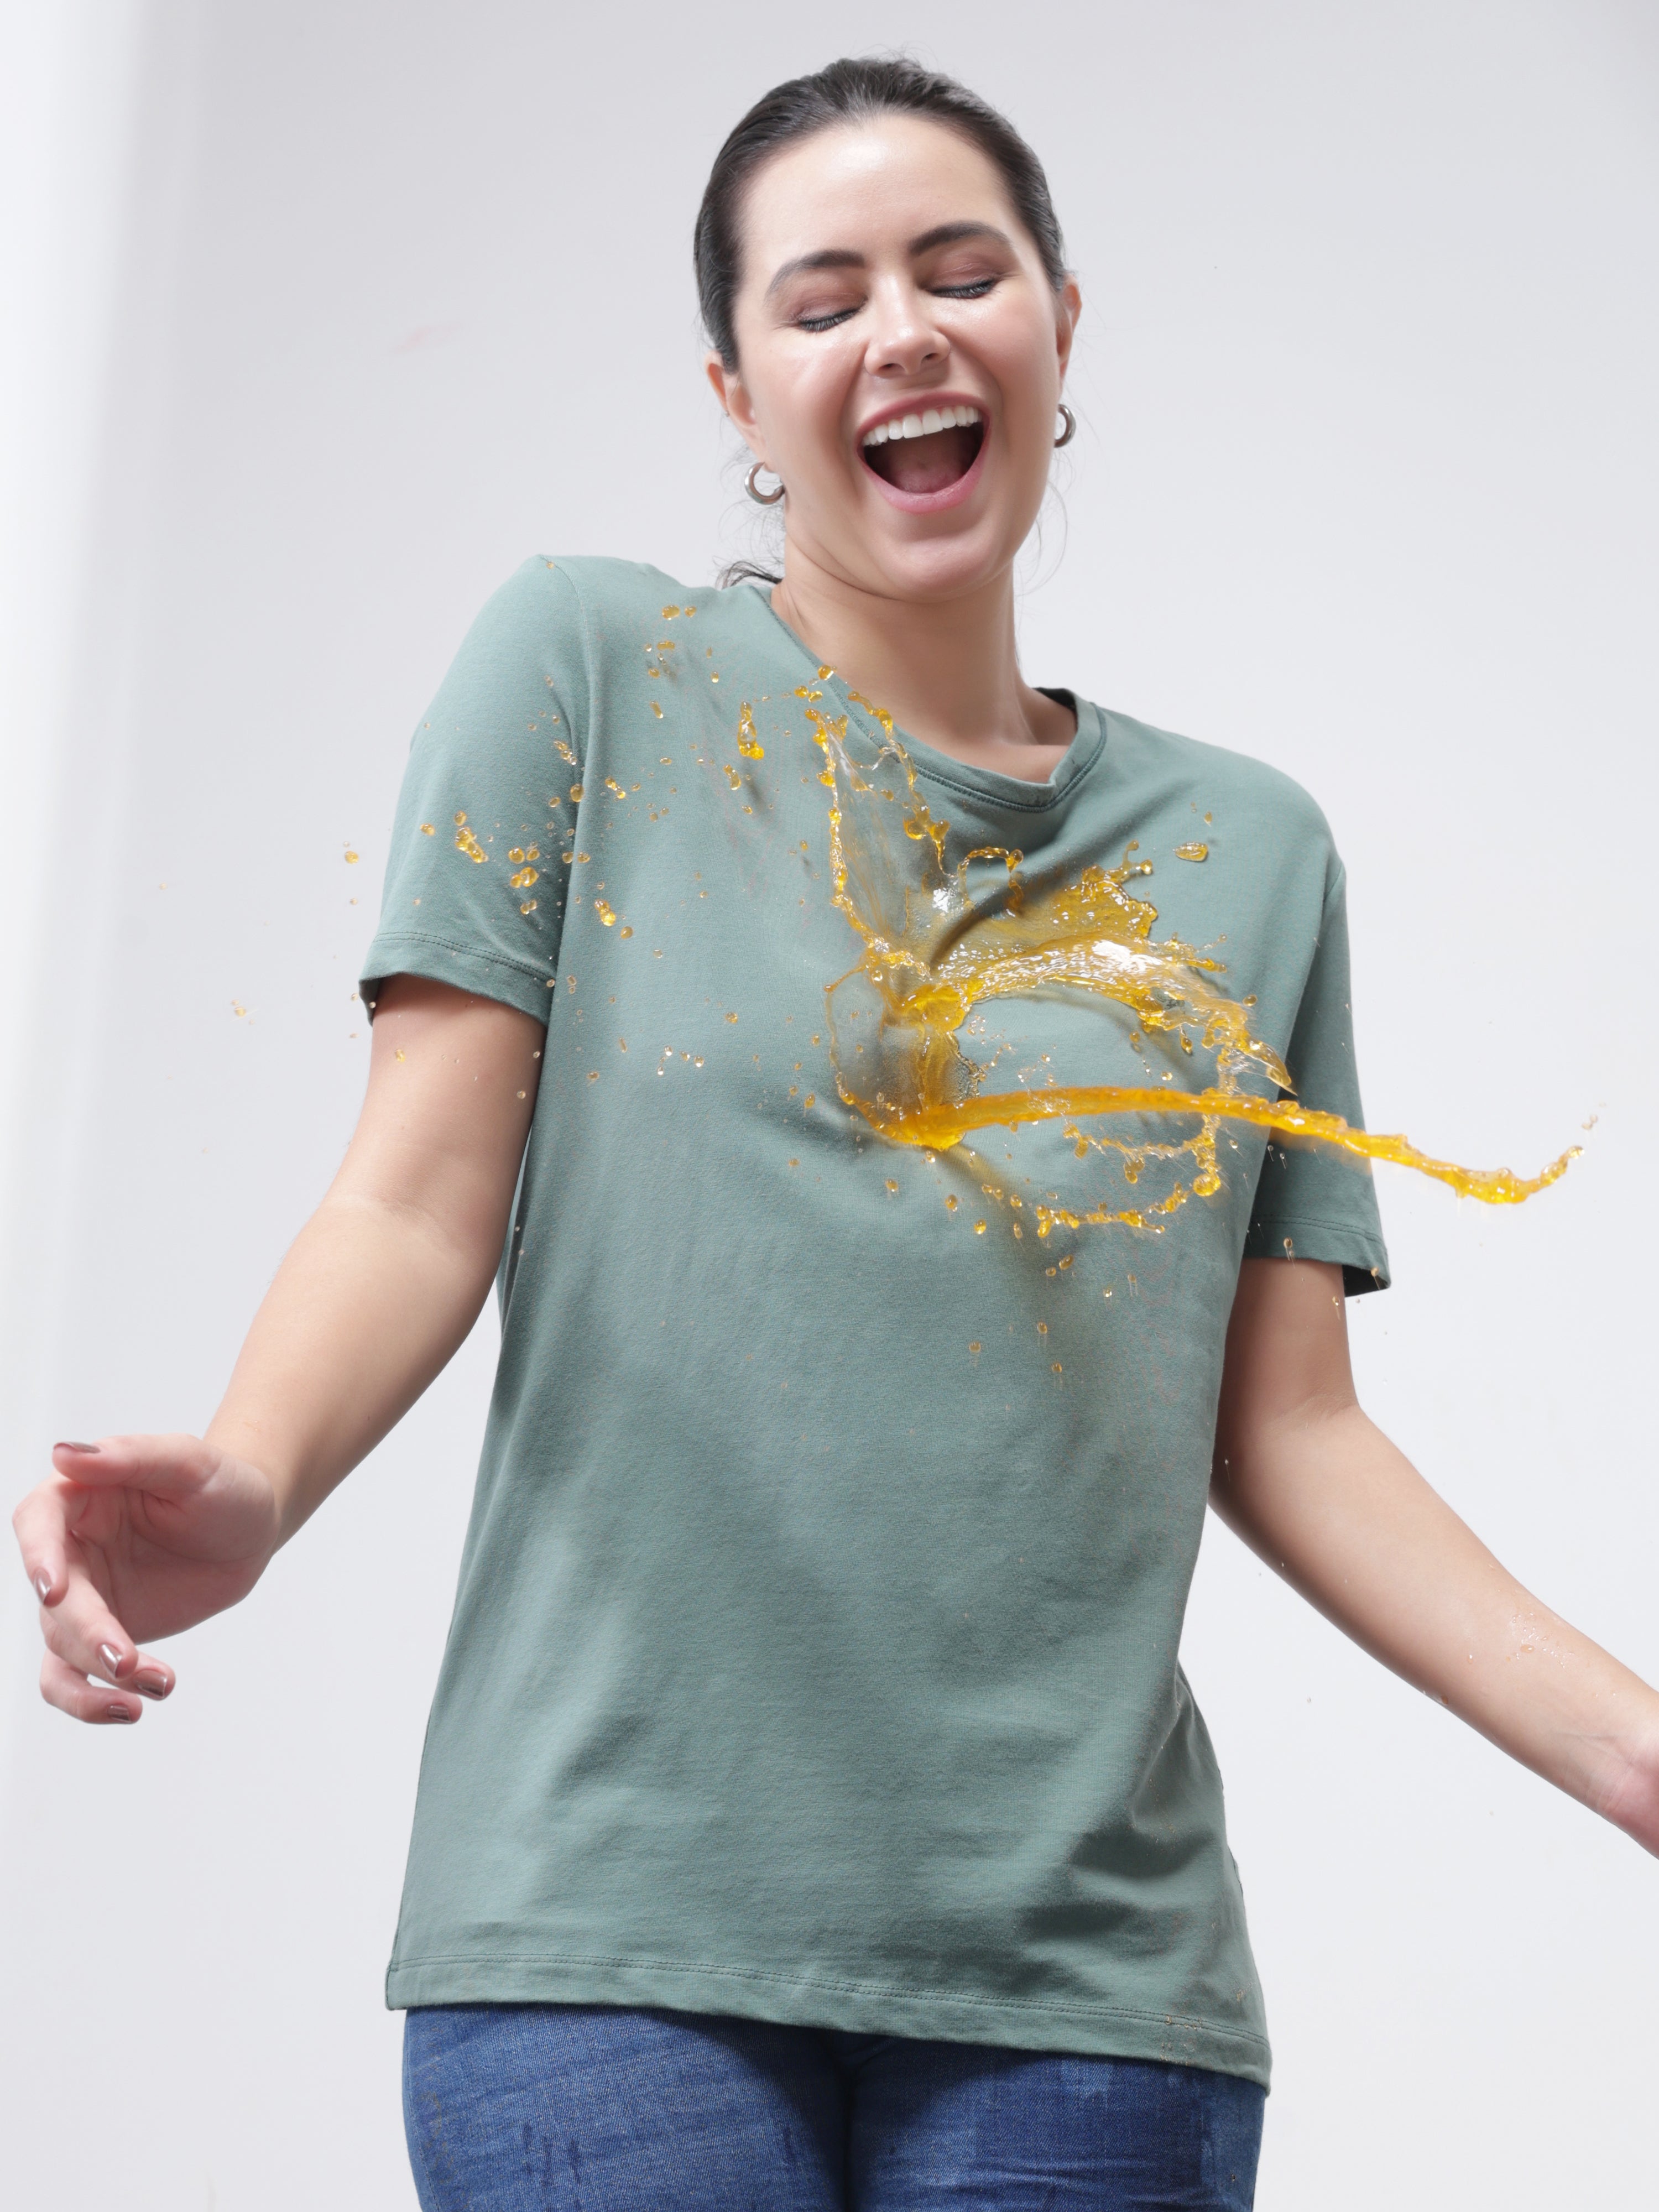 Woman smiling while liquid spills on her Simple Green stain-repellent and odor-resistant round-neck Turms T-shirt.